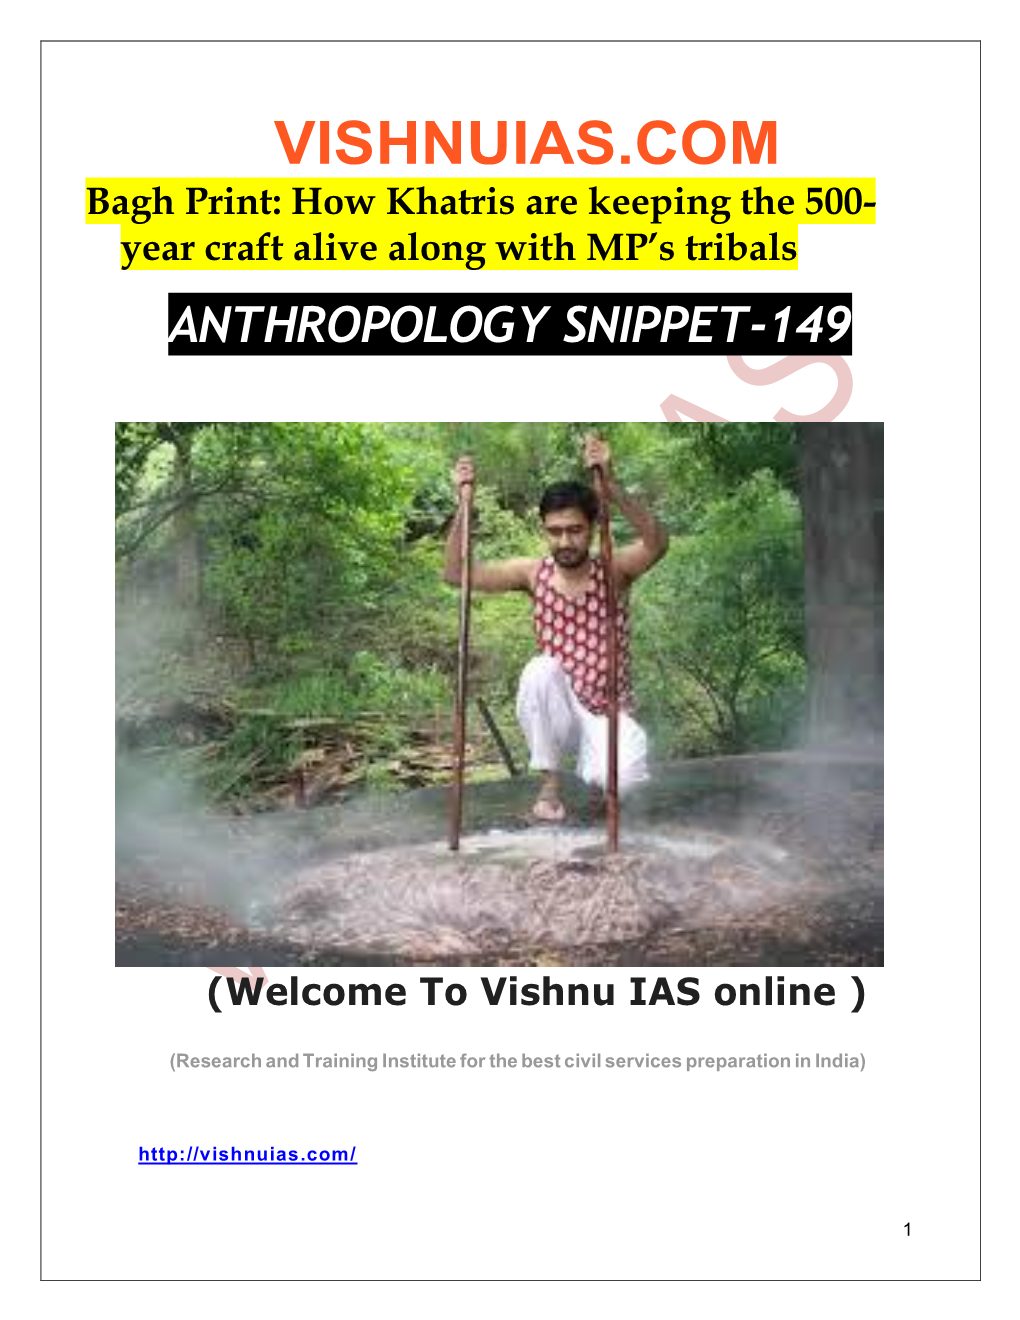 Bagh Print: How Khatris Are Keeping the 500- Year Craft Alive Along with MP’S Tribals ANTHROPOLOGY SNIPPET-149